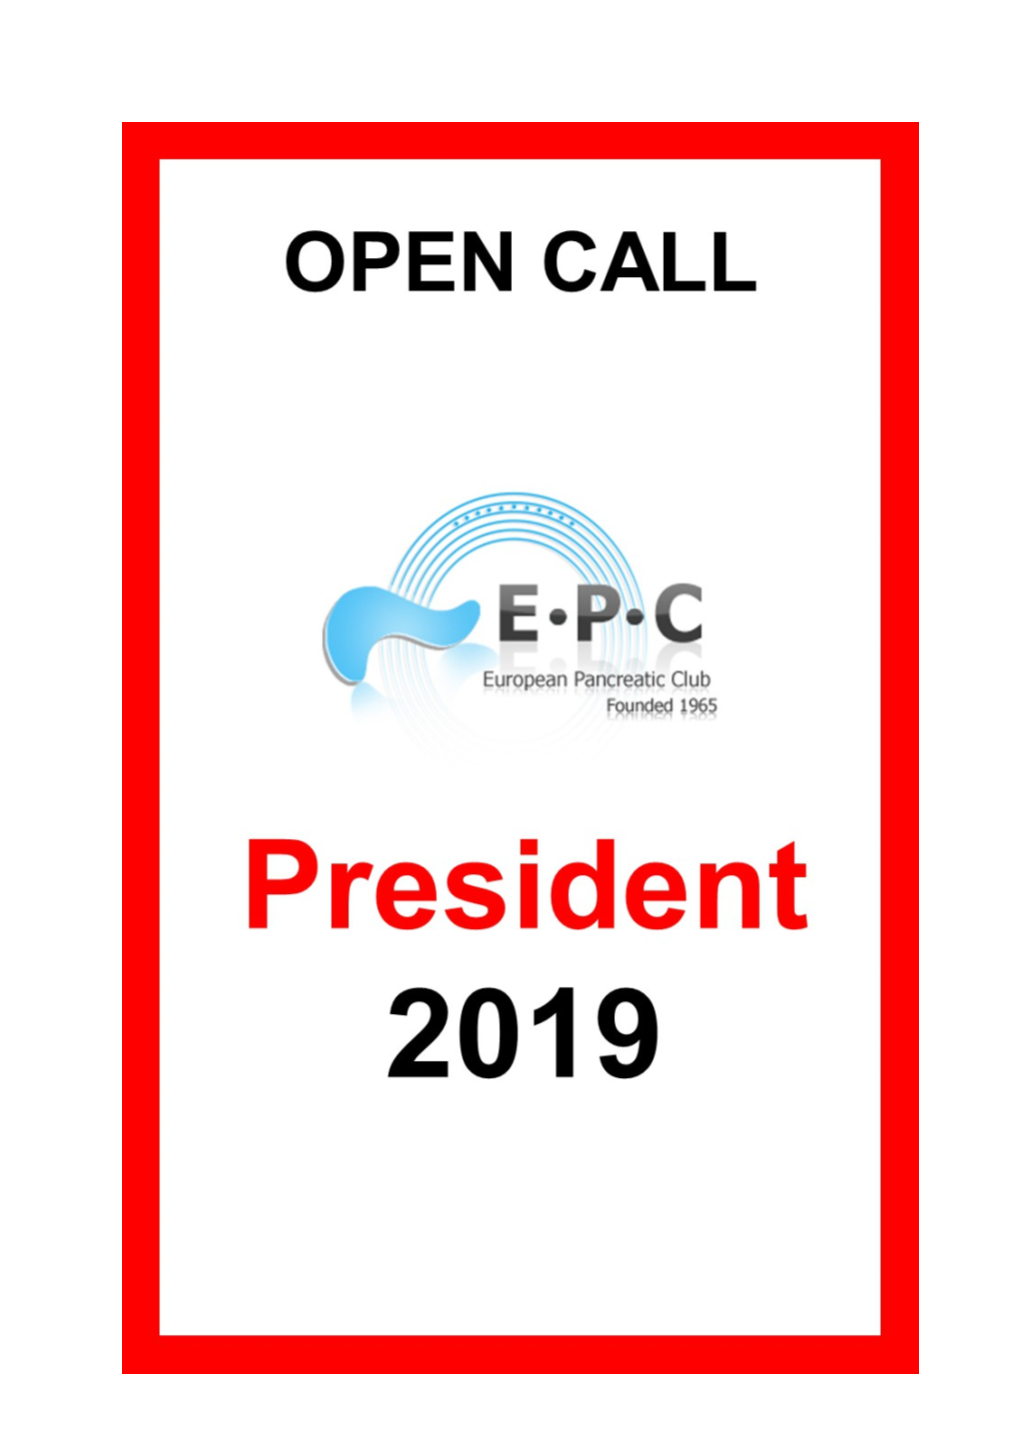 For President of the European Pancreatic Club (EPC)In 2019